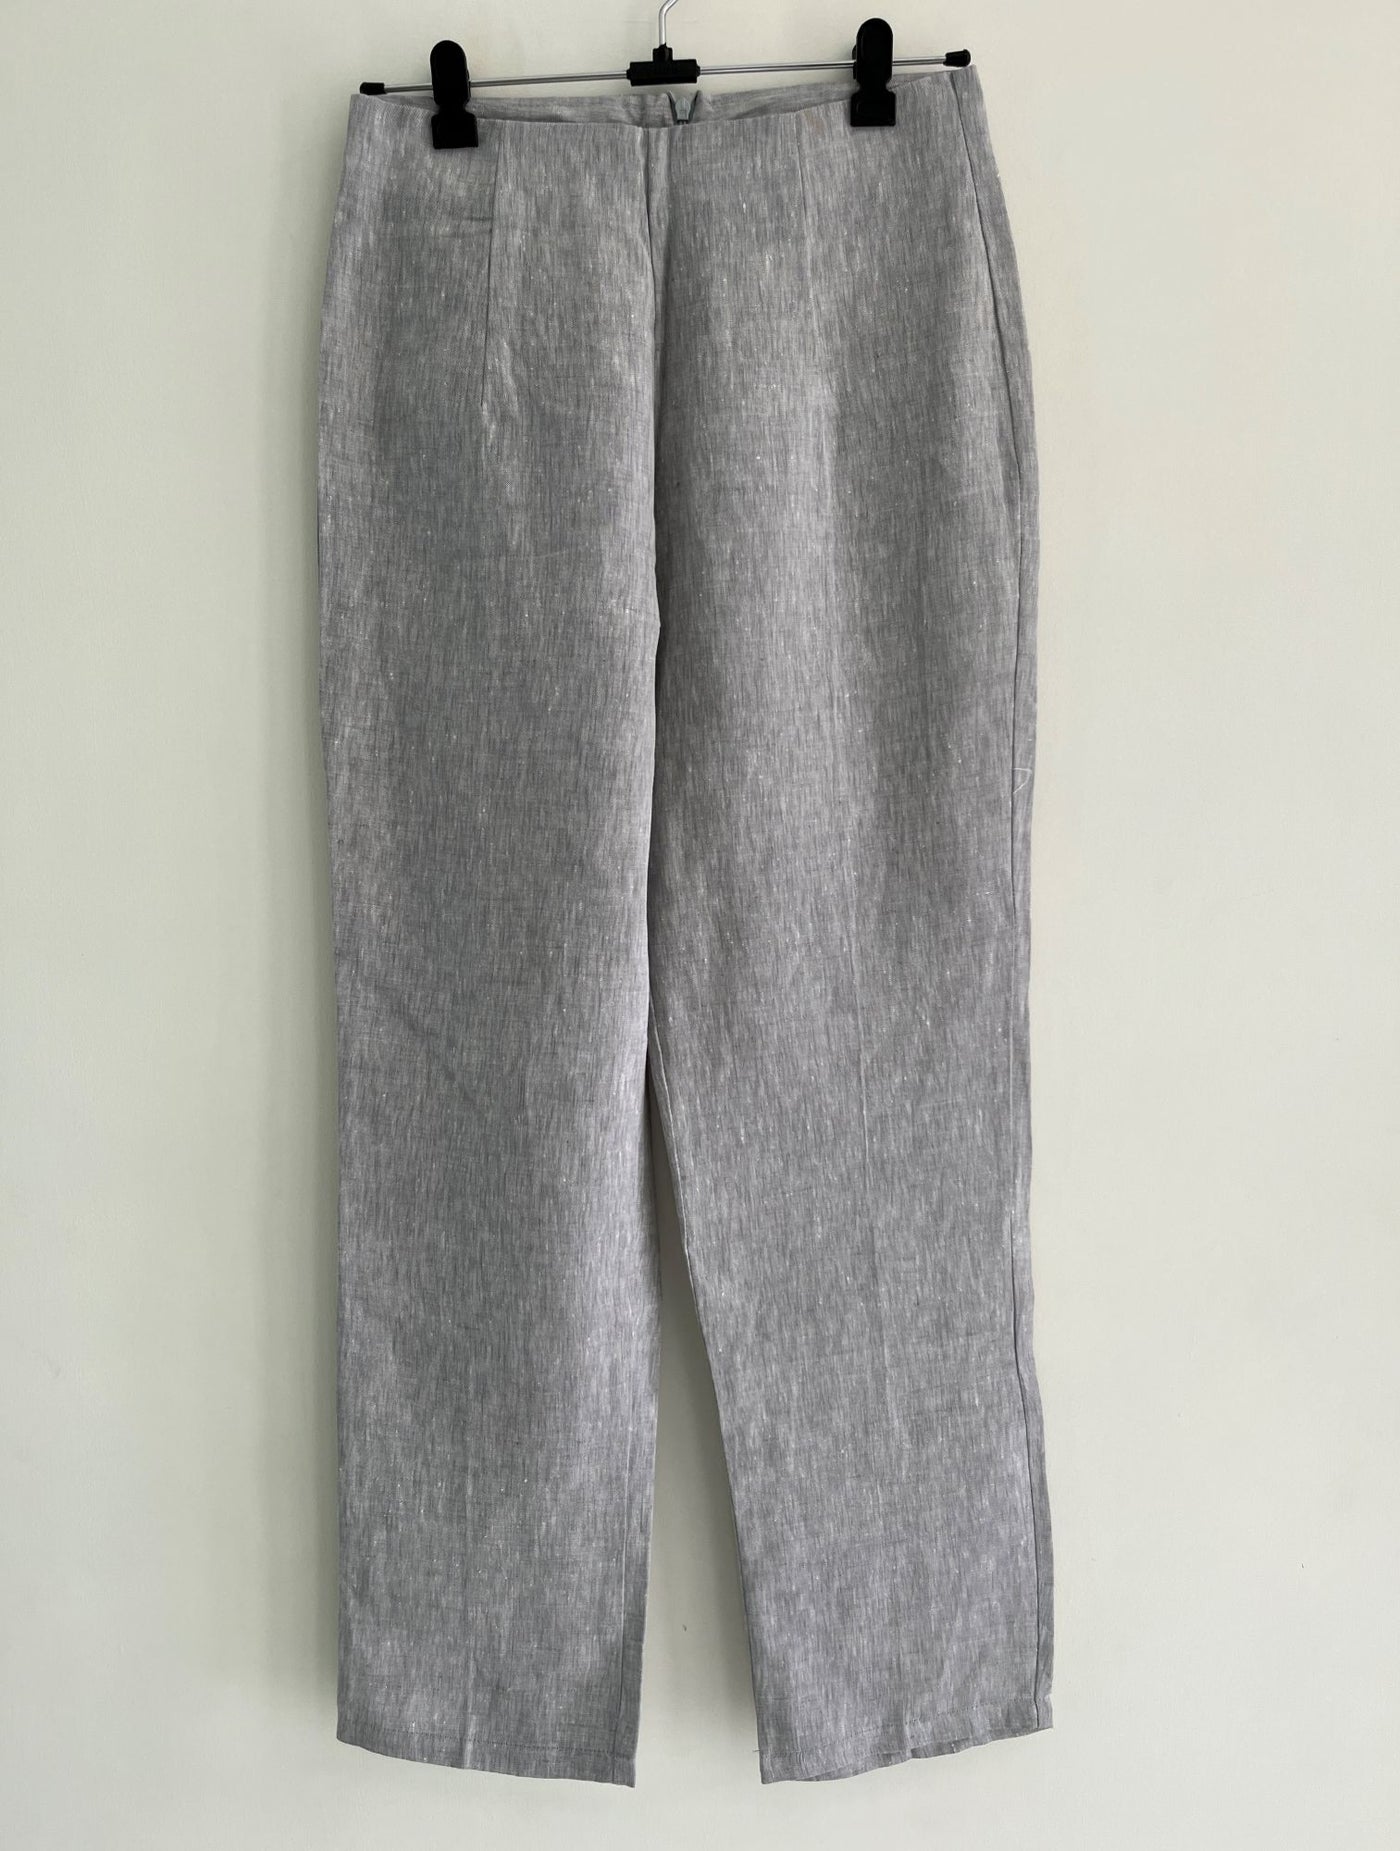 Grey Linen Summer Pants (M Size/ 28 Inches)